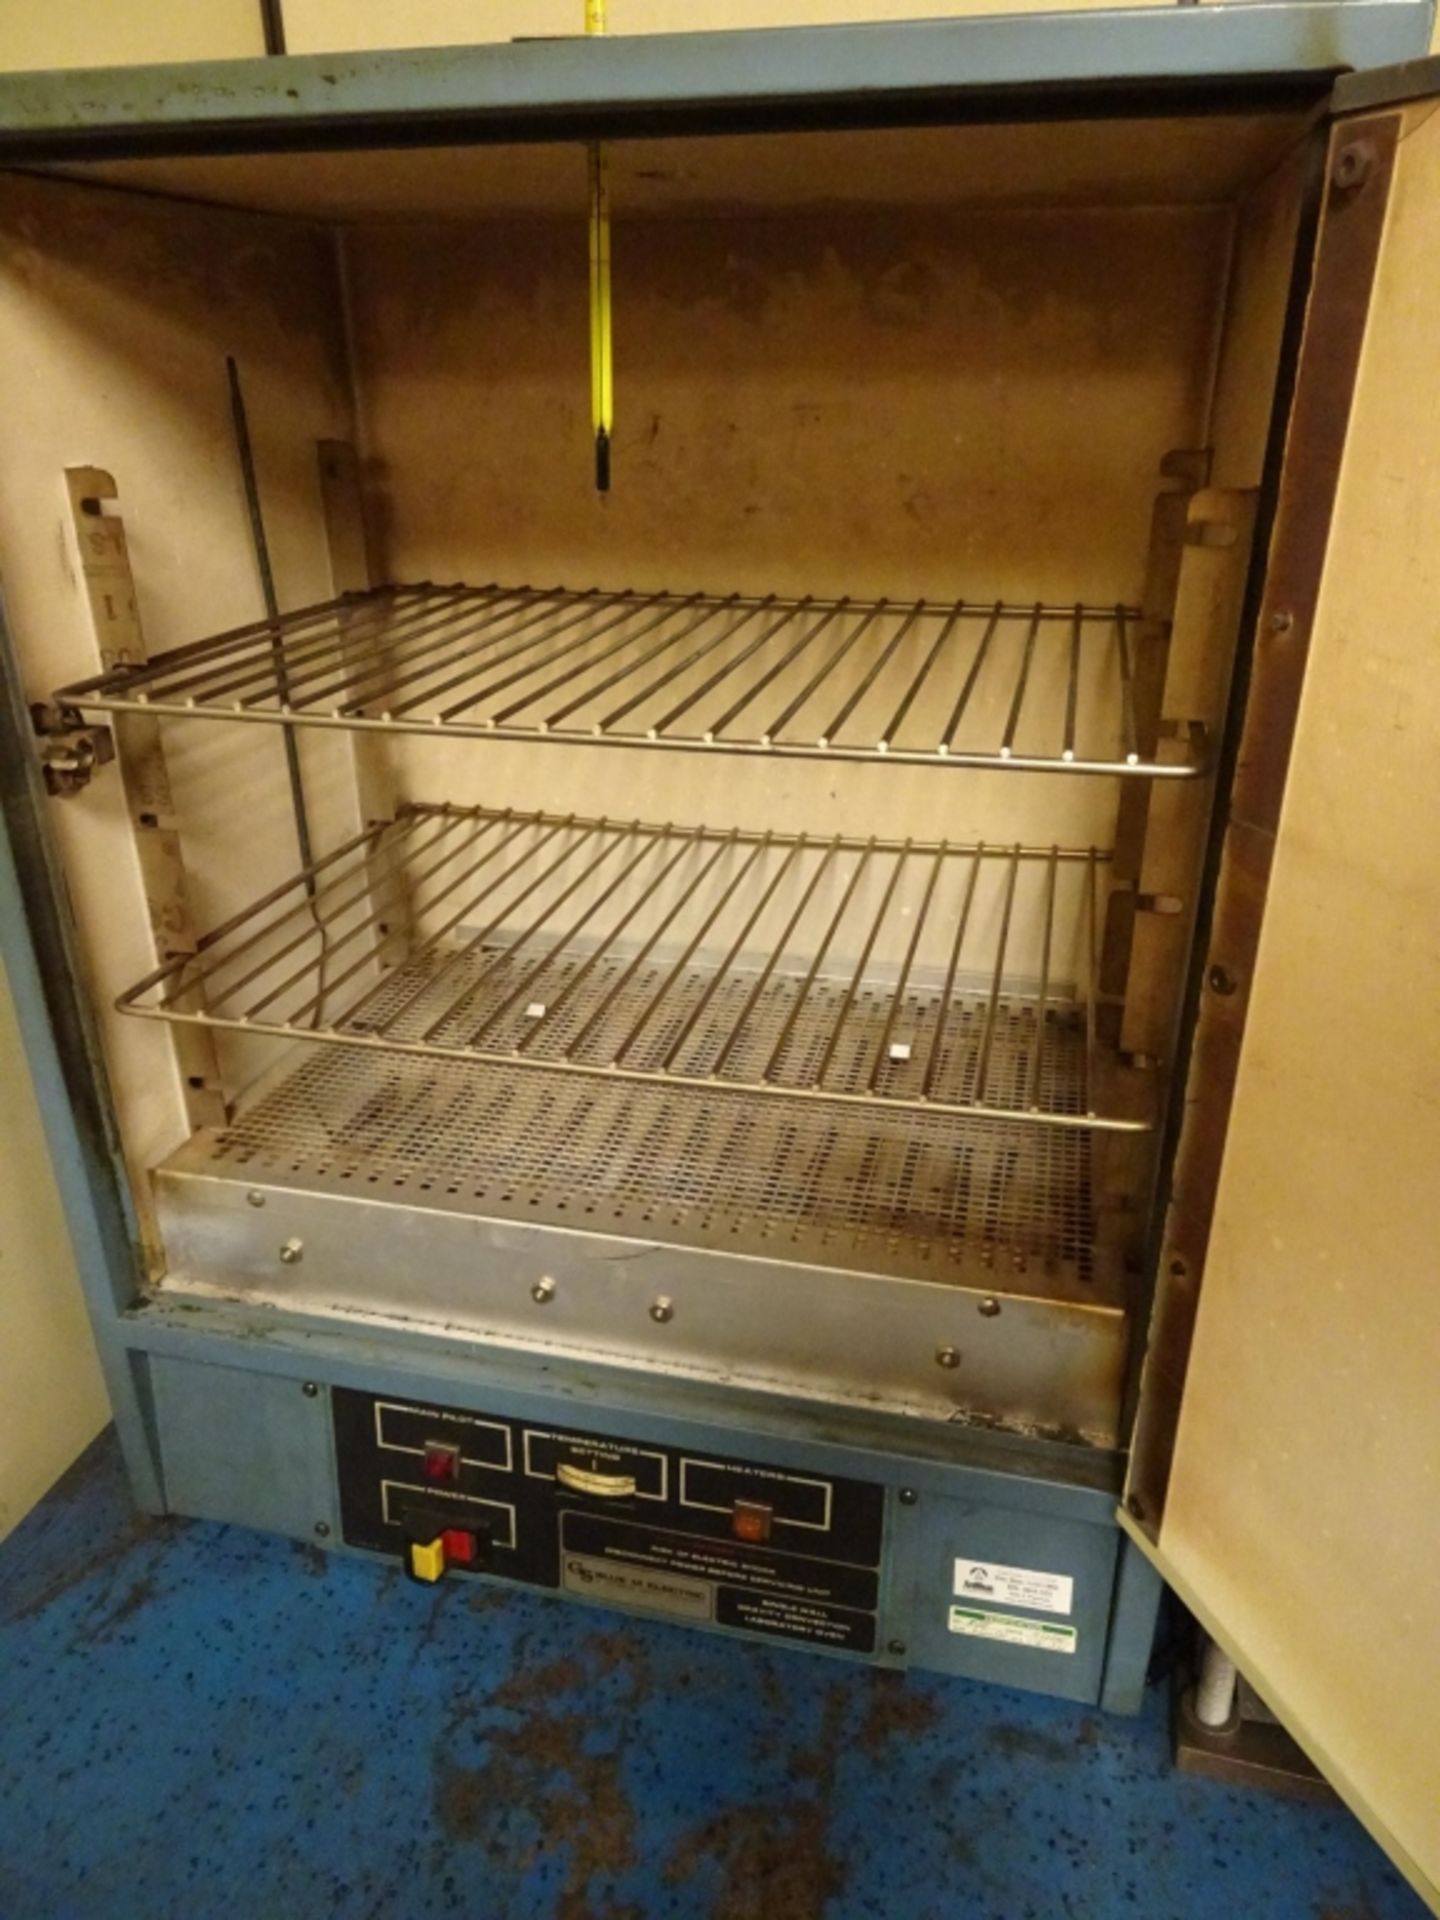 Blue M Model SW-17TA-1 Bench Top Lab Oven Max Temps 200 Degree C / 392 Degree F 120V, 1ph, 60Hz, - Image 3 of 5